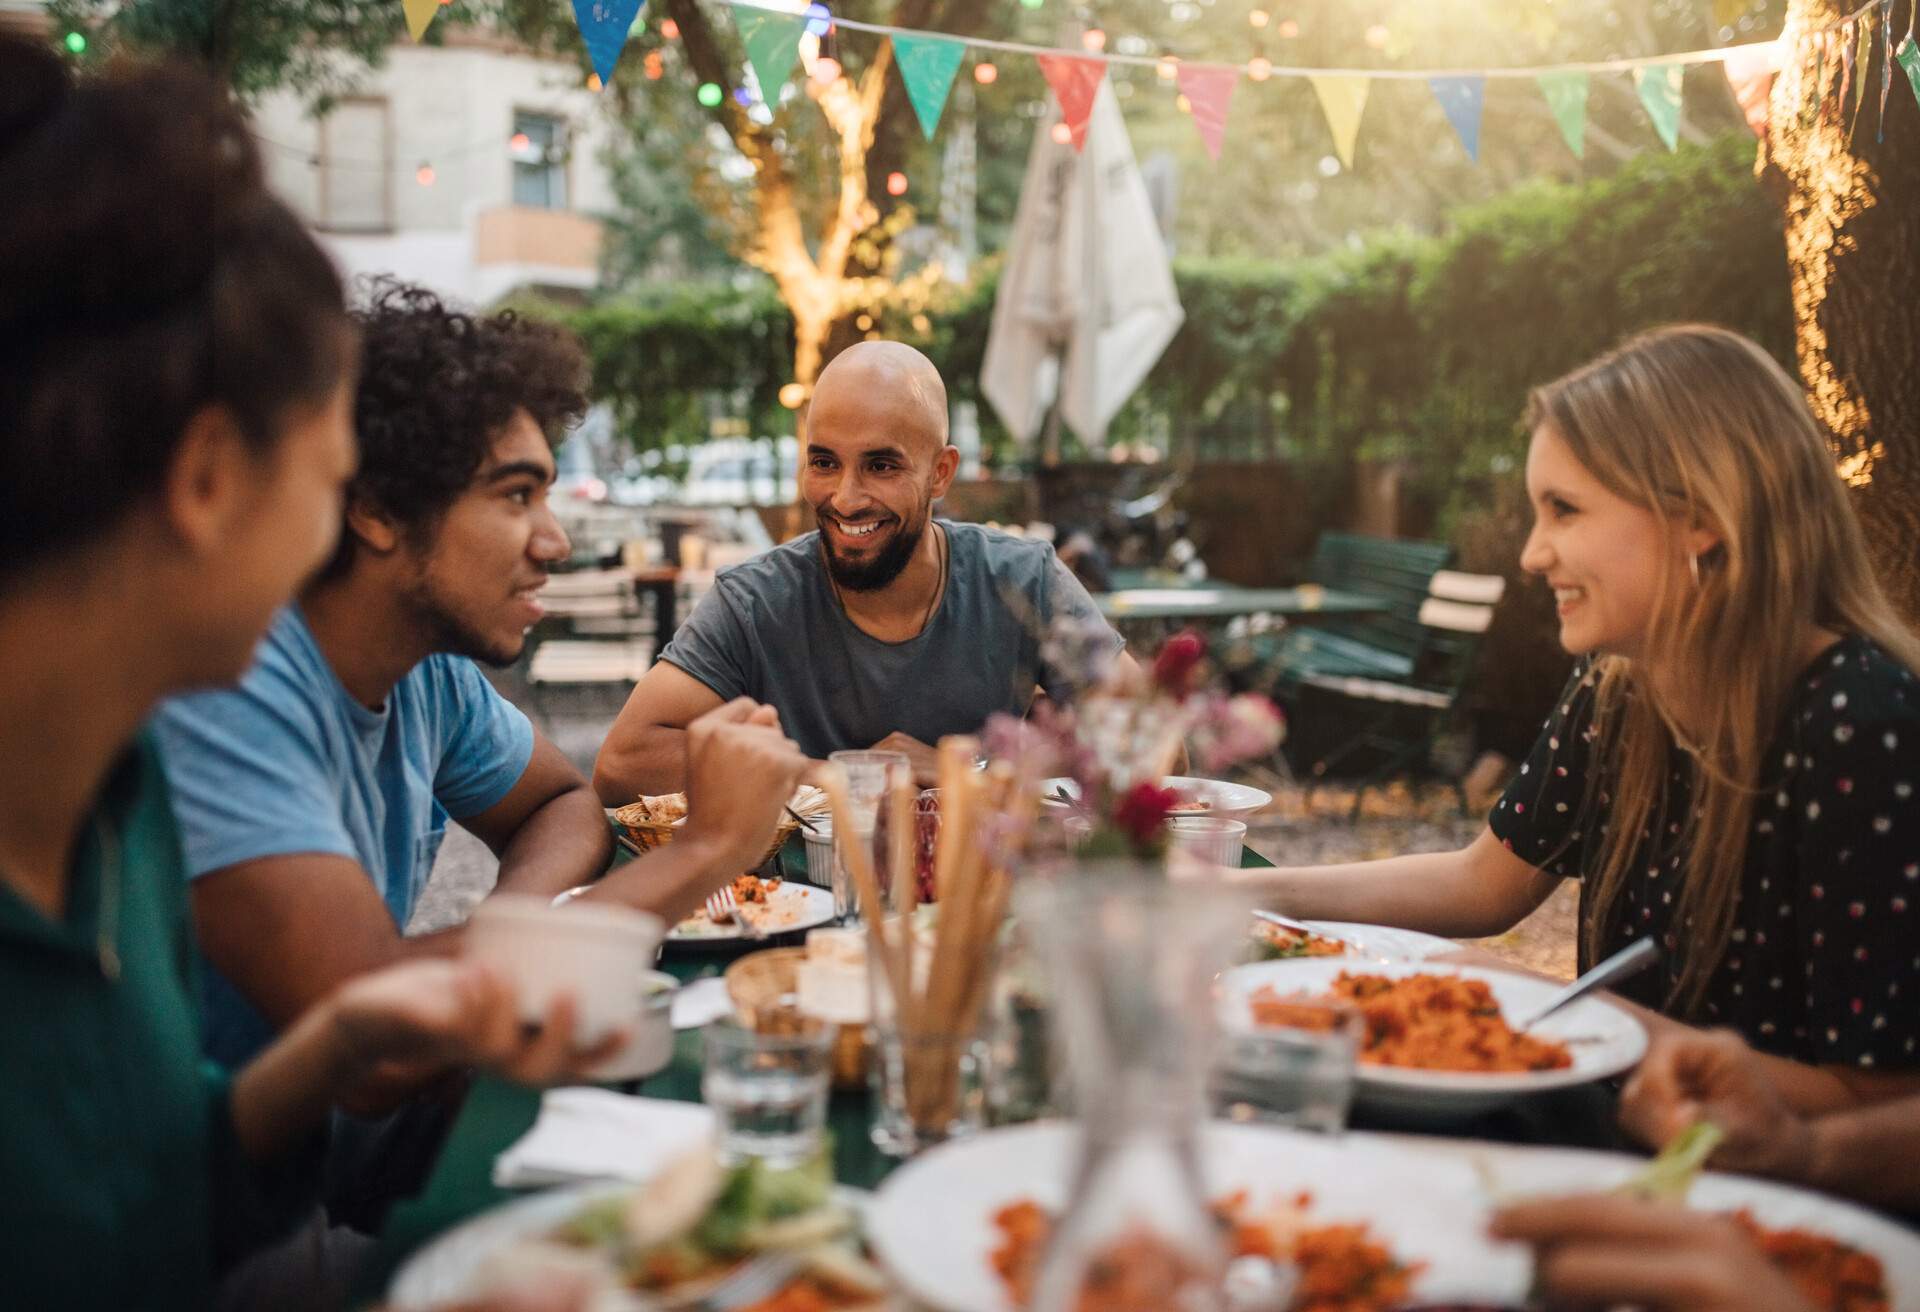 theme_restaurant_people_friends_beer-garden_gettyimages-1091920222_universal_within-usage-period_84834